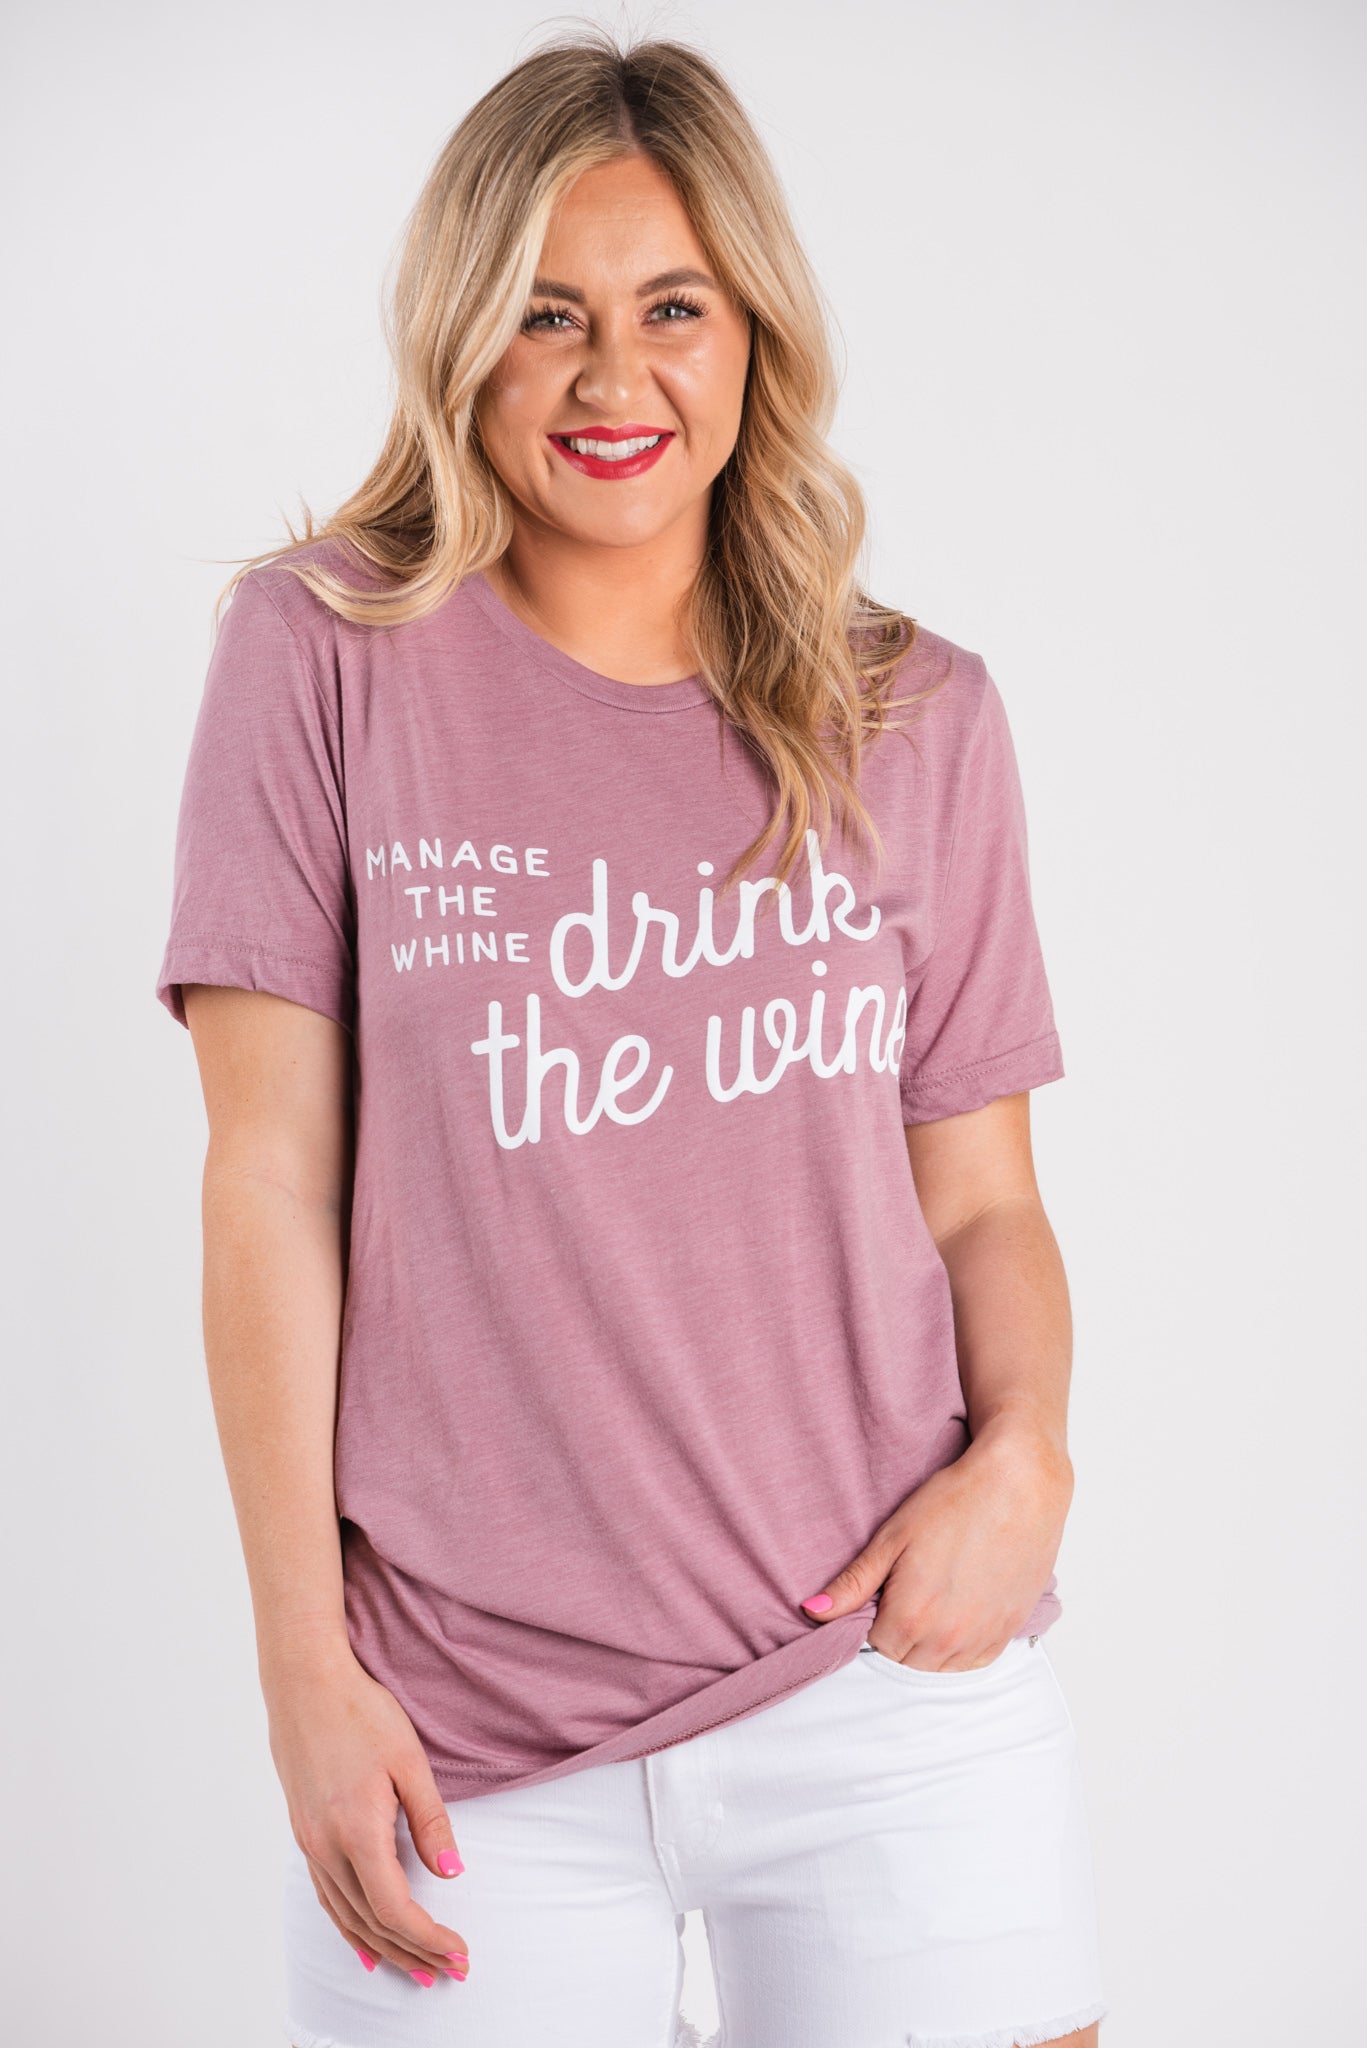 Manage the whine, drink the wine unisex short sleeve t-shirt orchid - Trendy T-shirts - Cute Graphic Tee Fashion at Lush Fashion Lounge Boutique in Oklahoma